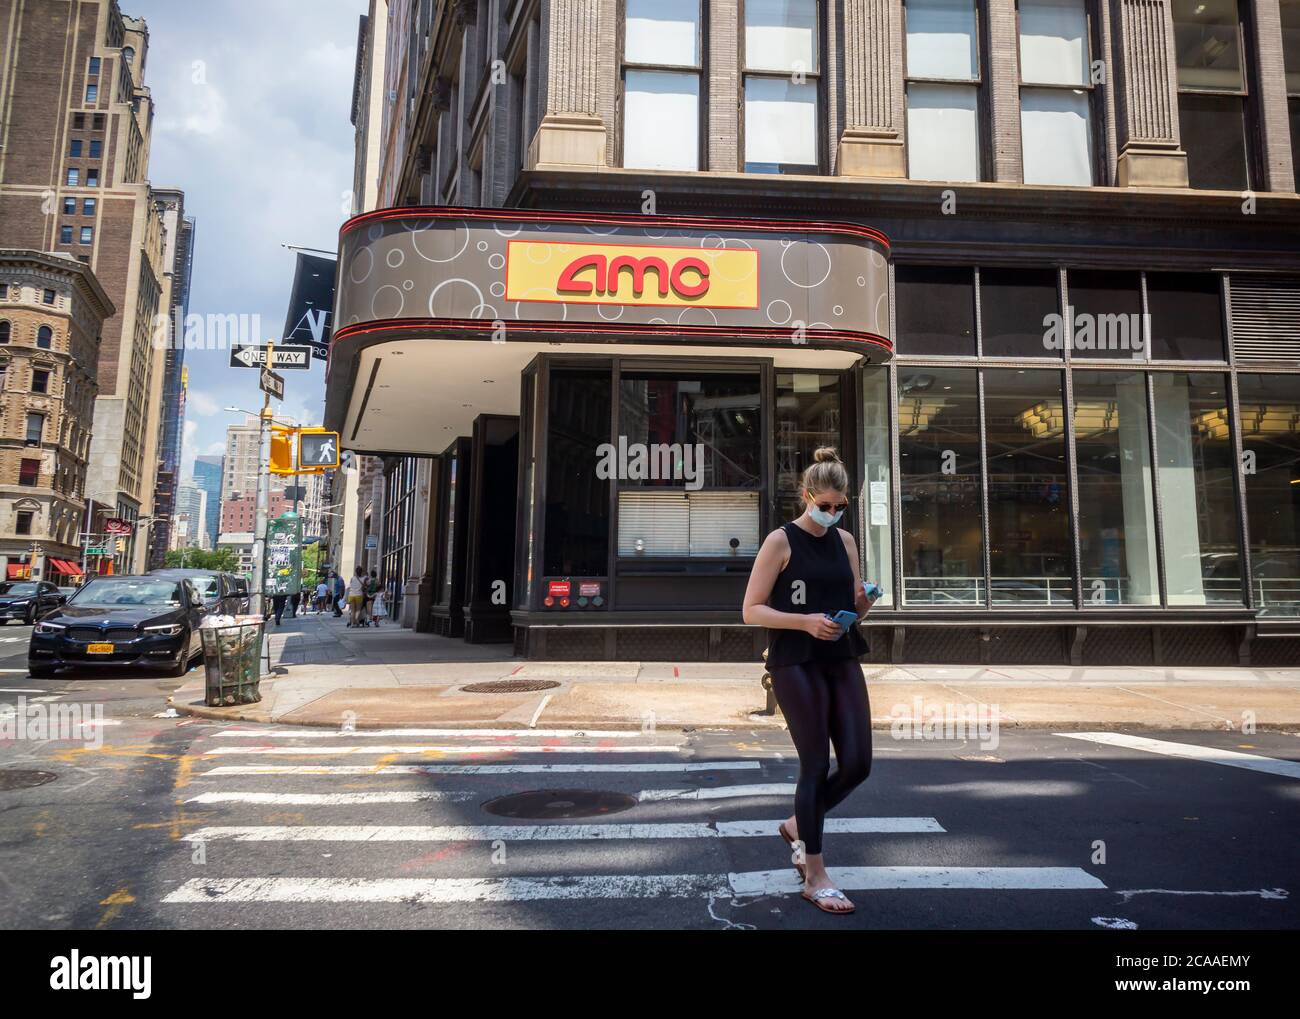 The closed AMC Theatre in the Flatiron neighborhood in New York on Wednesday, July 29, 2020. AMC Theatres, the largest chain of movie theaters in the country, announced plans to open in mid-to-late August in time for the release of the potential summer blockbuster, “Tenet”.(© Richard B. Levine) Stock Photo